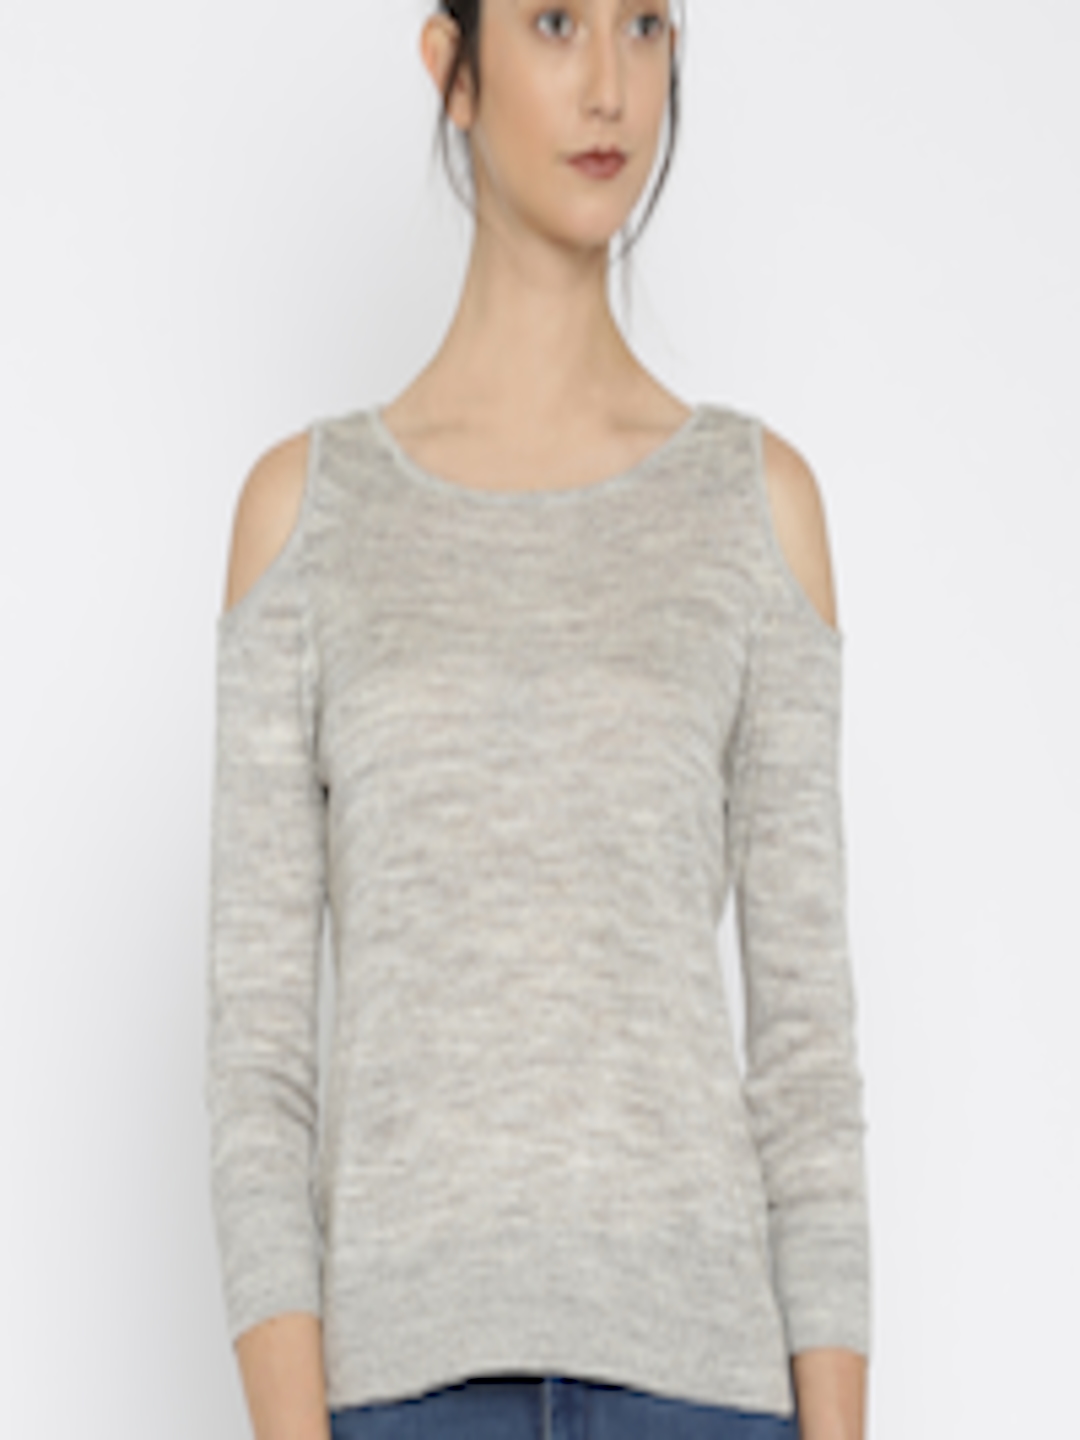 Buy ONLY Grey Cold Shoulder Sweater - Sweaters for Women 1810863 | Myntra